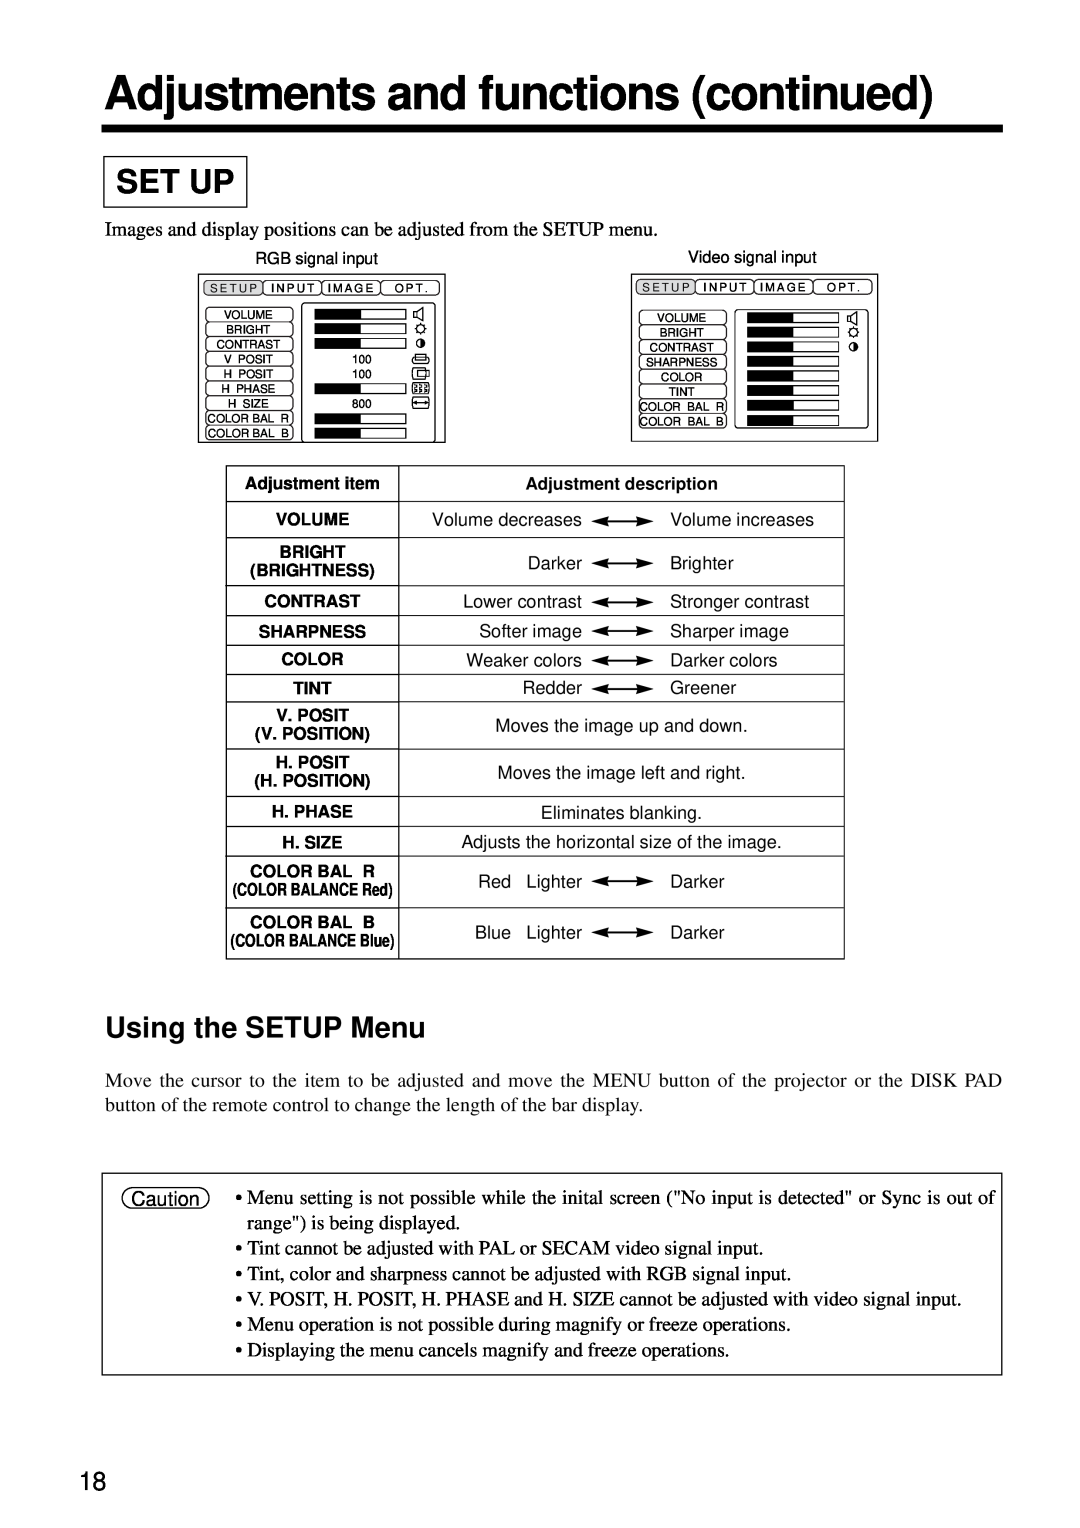 Hitachi CP-S860W user manual Adjustments and functions continued, Set Up, Using the SETUP Menu 